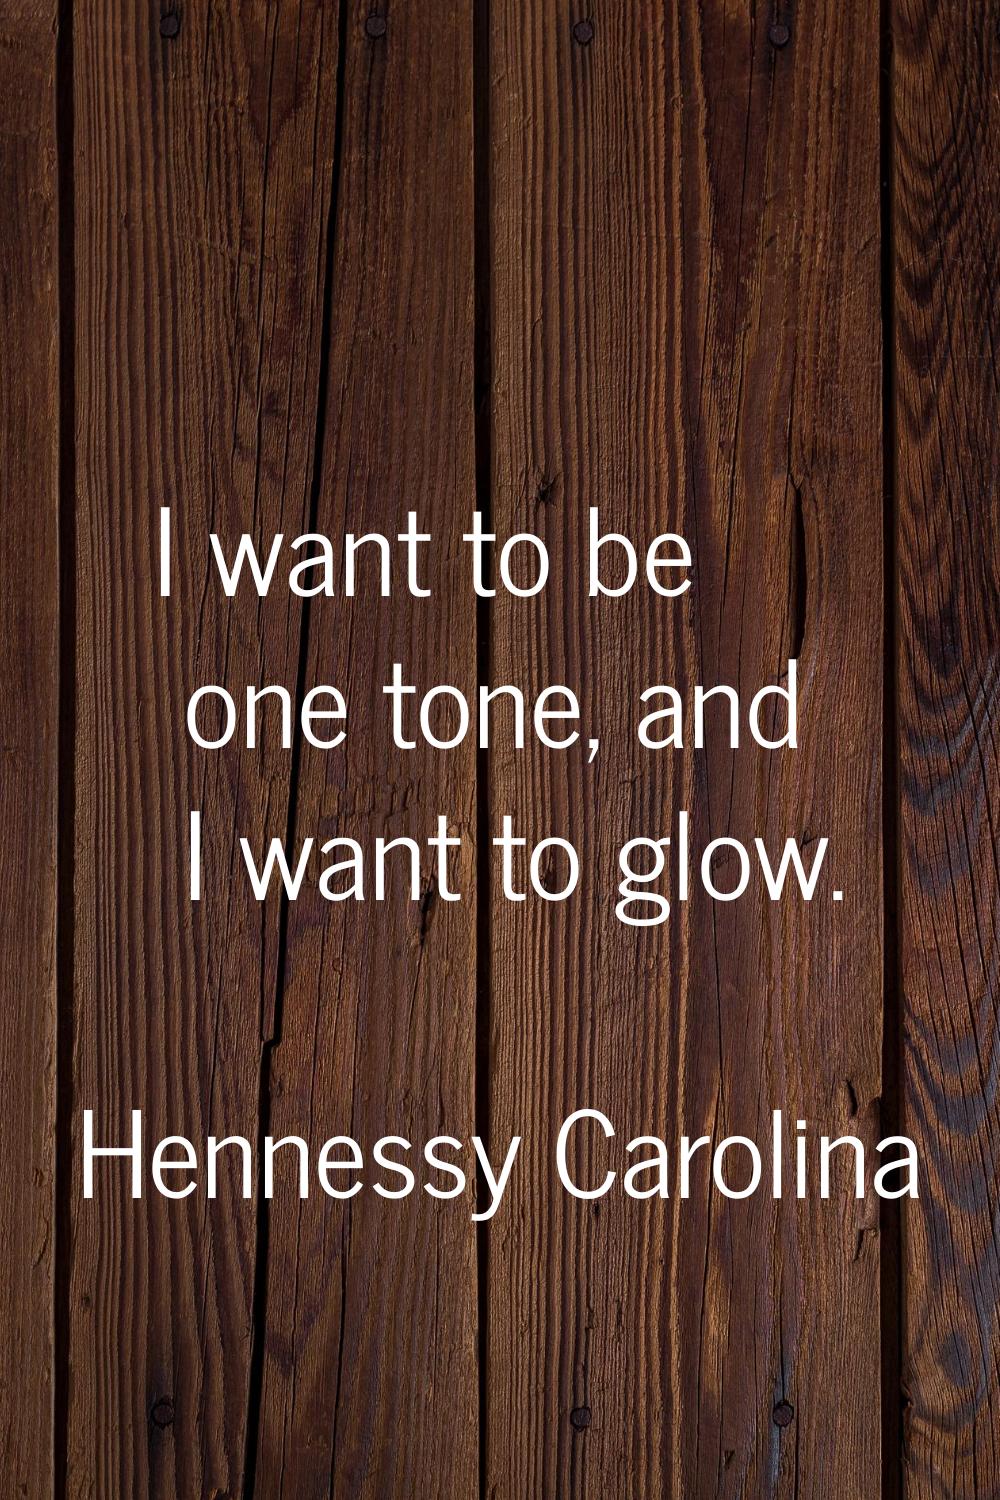 I want to be one tone, and I want to glow.